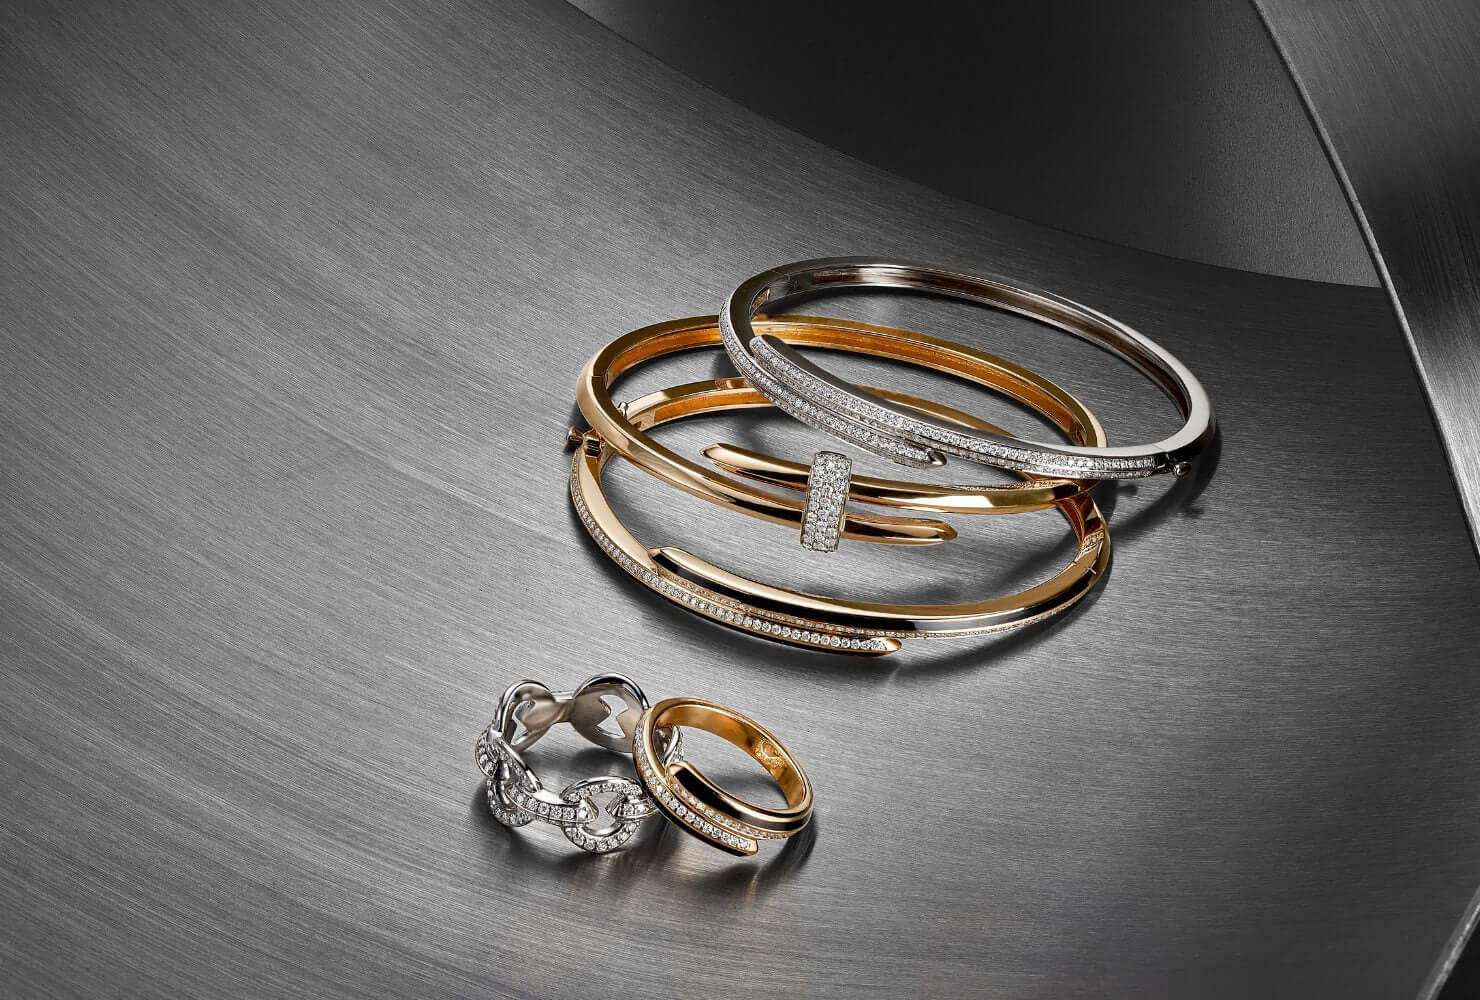 Image of three Duel bracelets next to two Duel rings on a grey work surface.